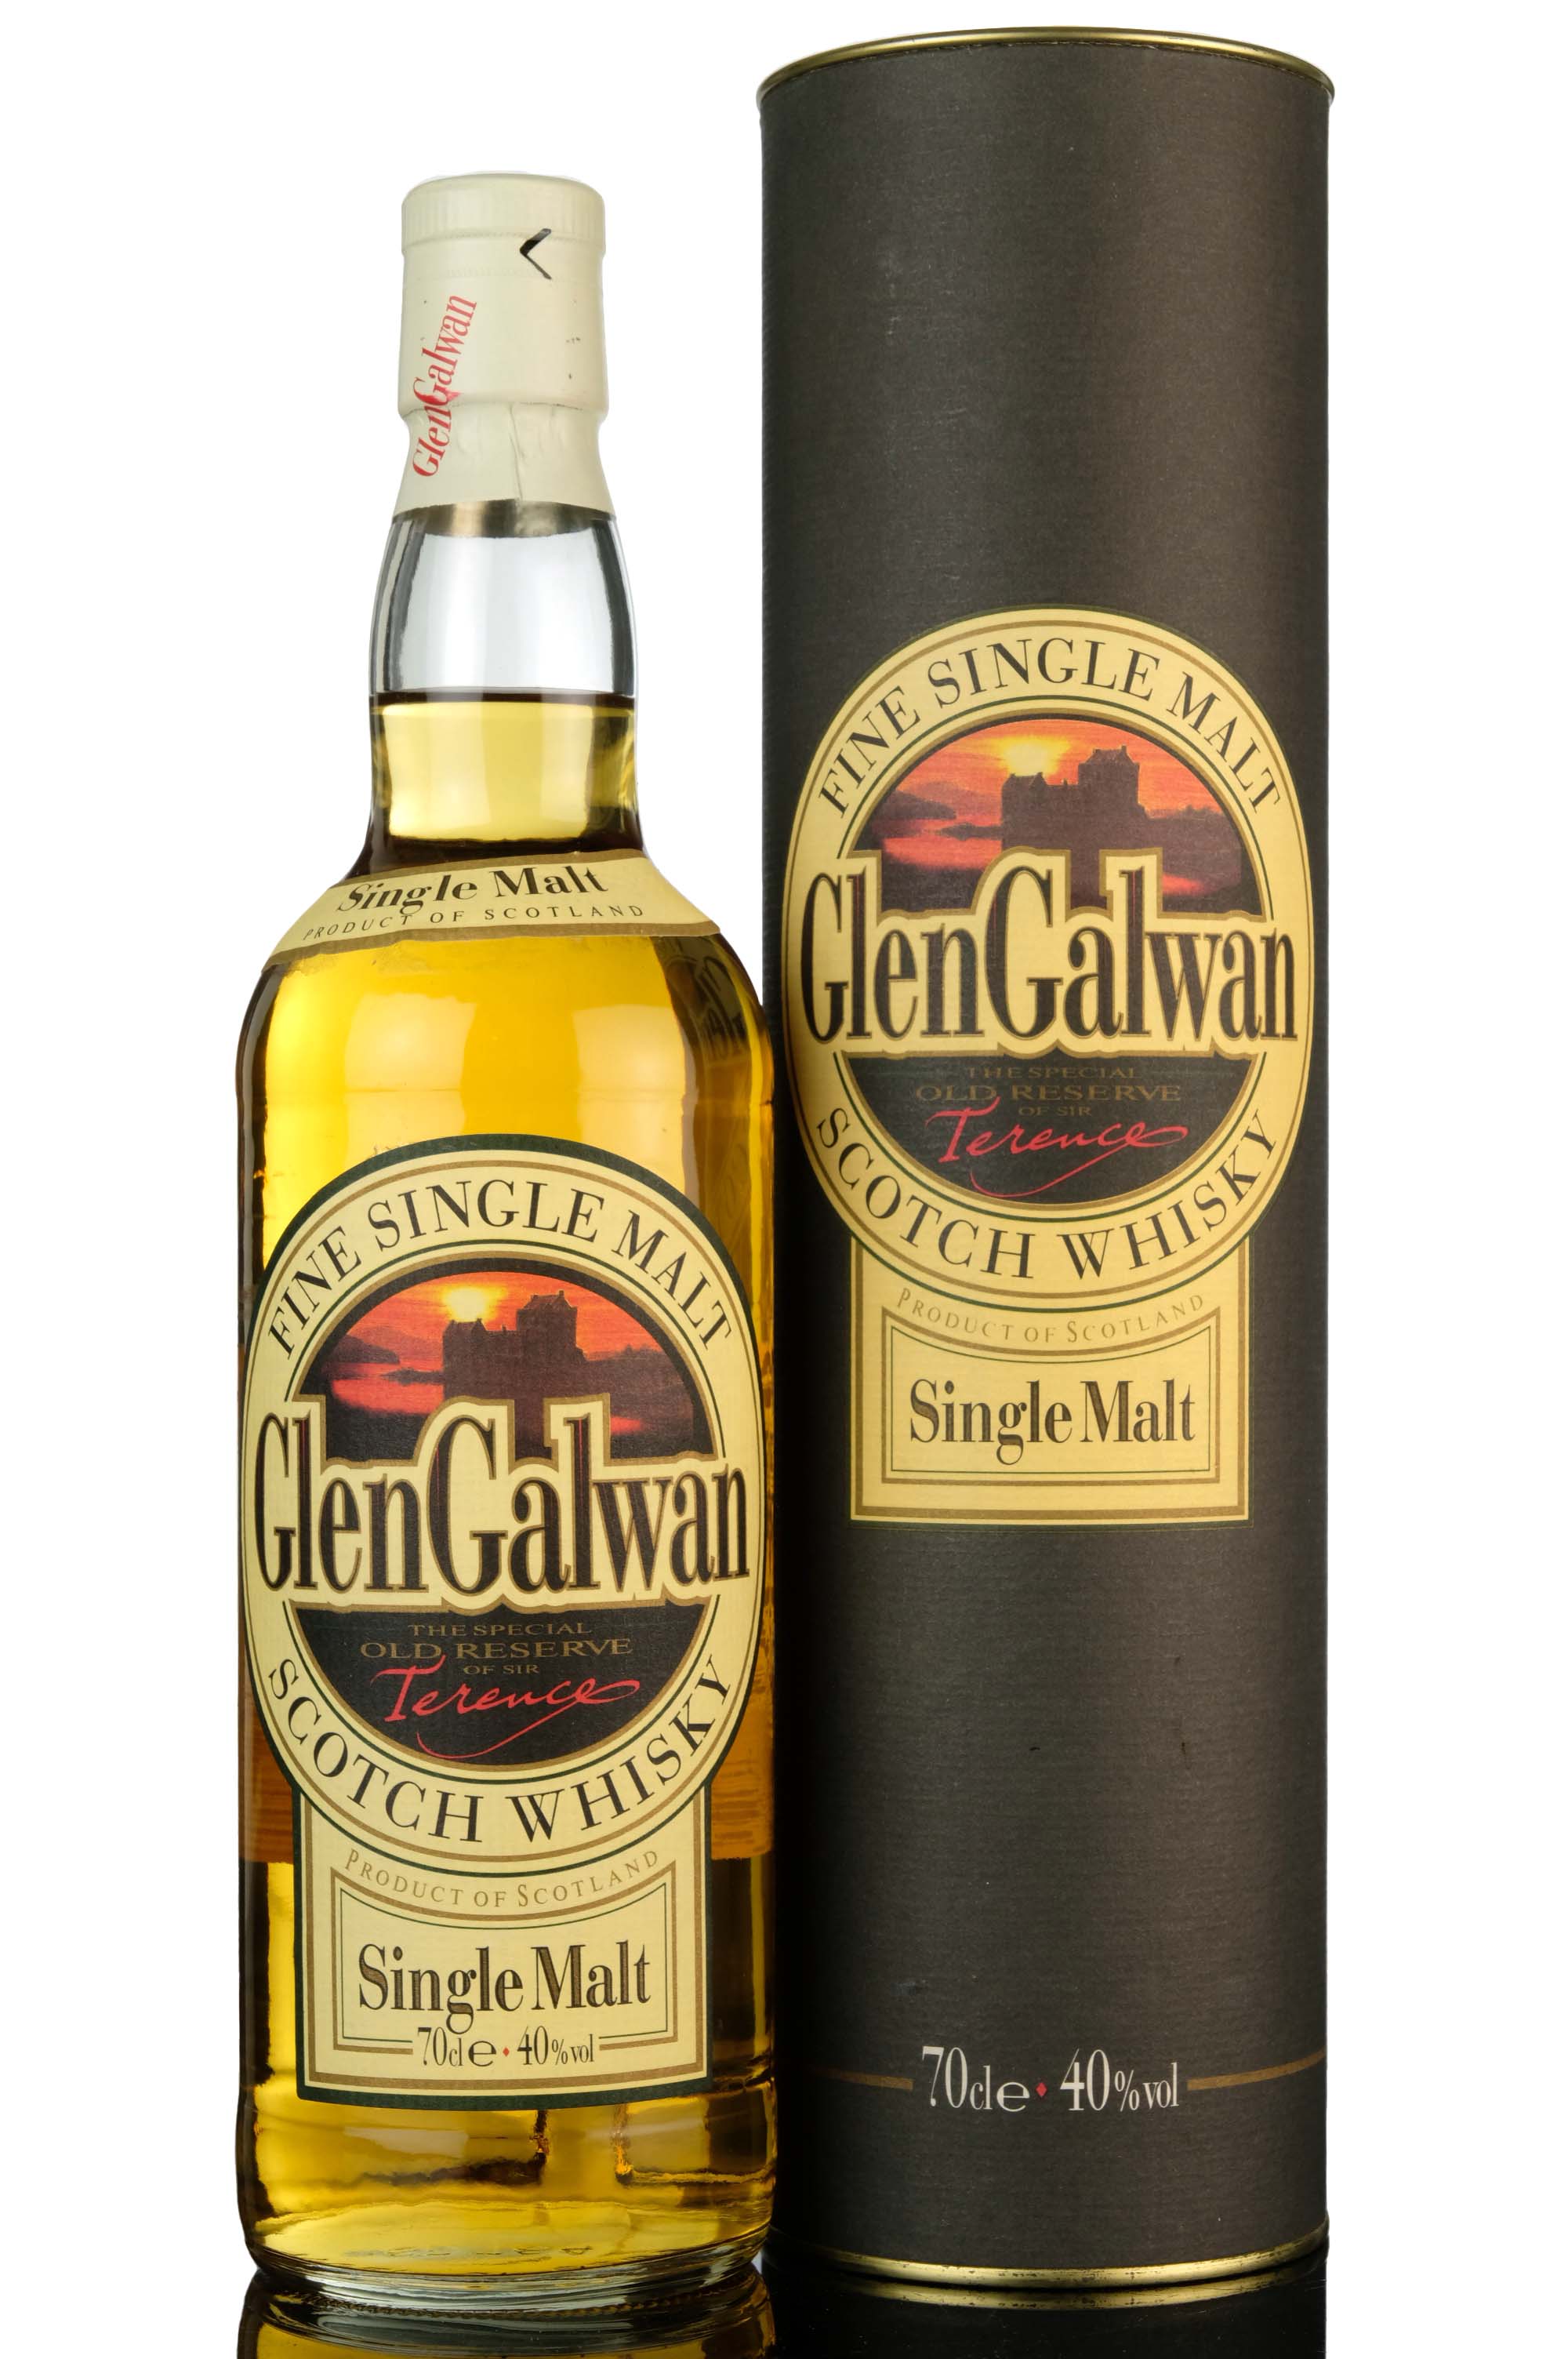 GlenGalwan The Special Old Reserve Of Sir Terence - 1990s